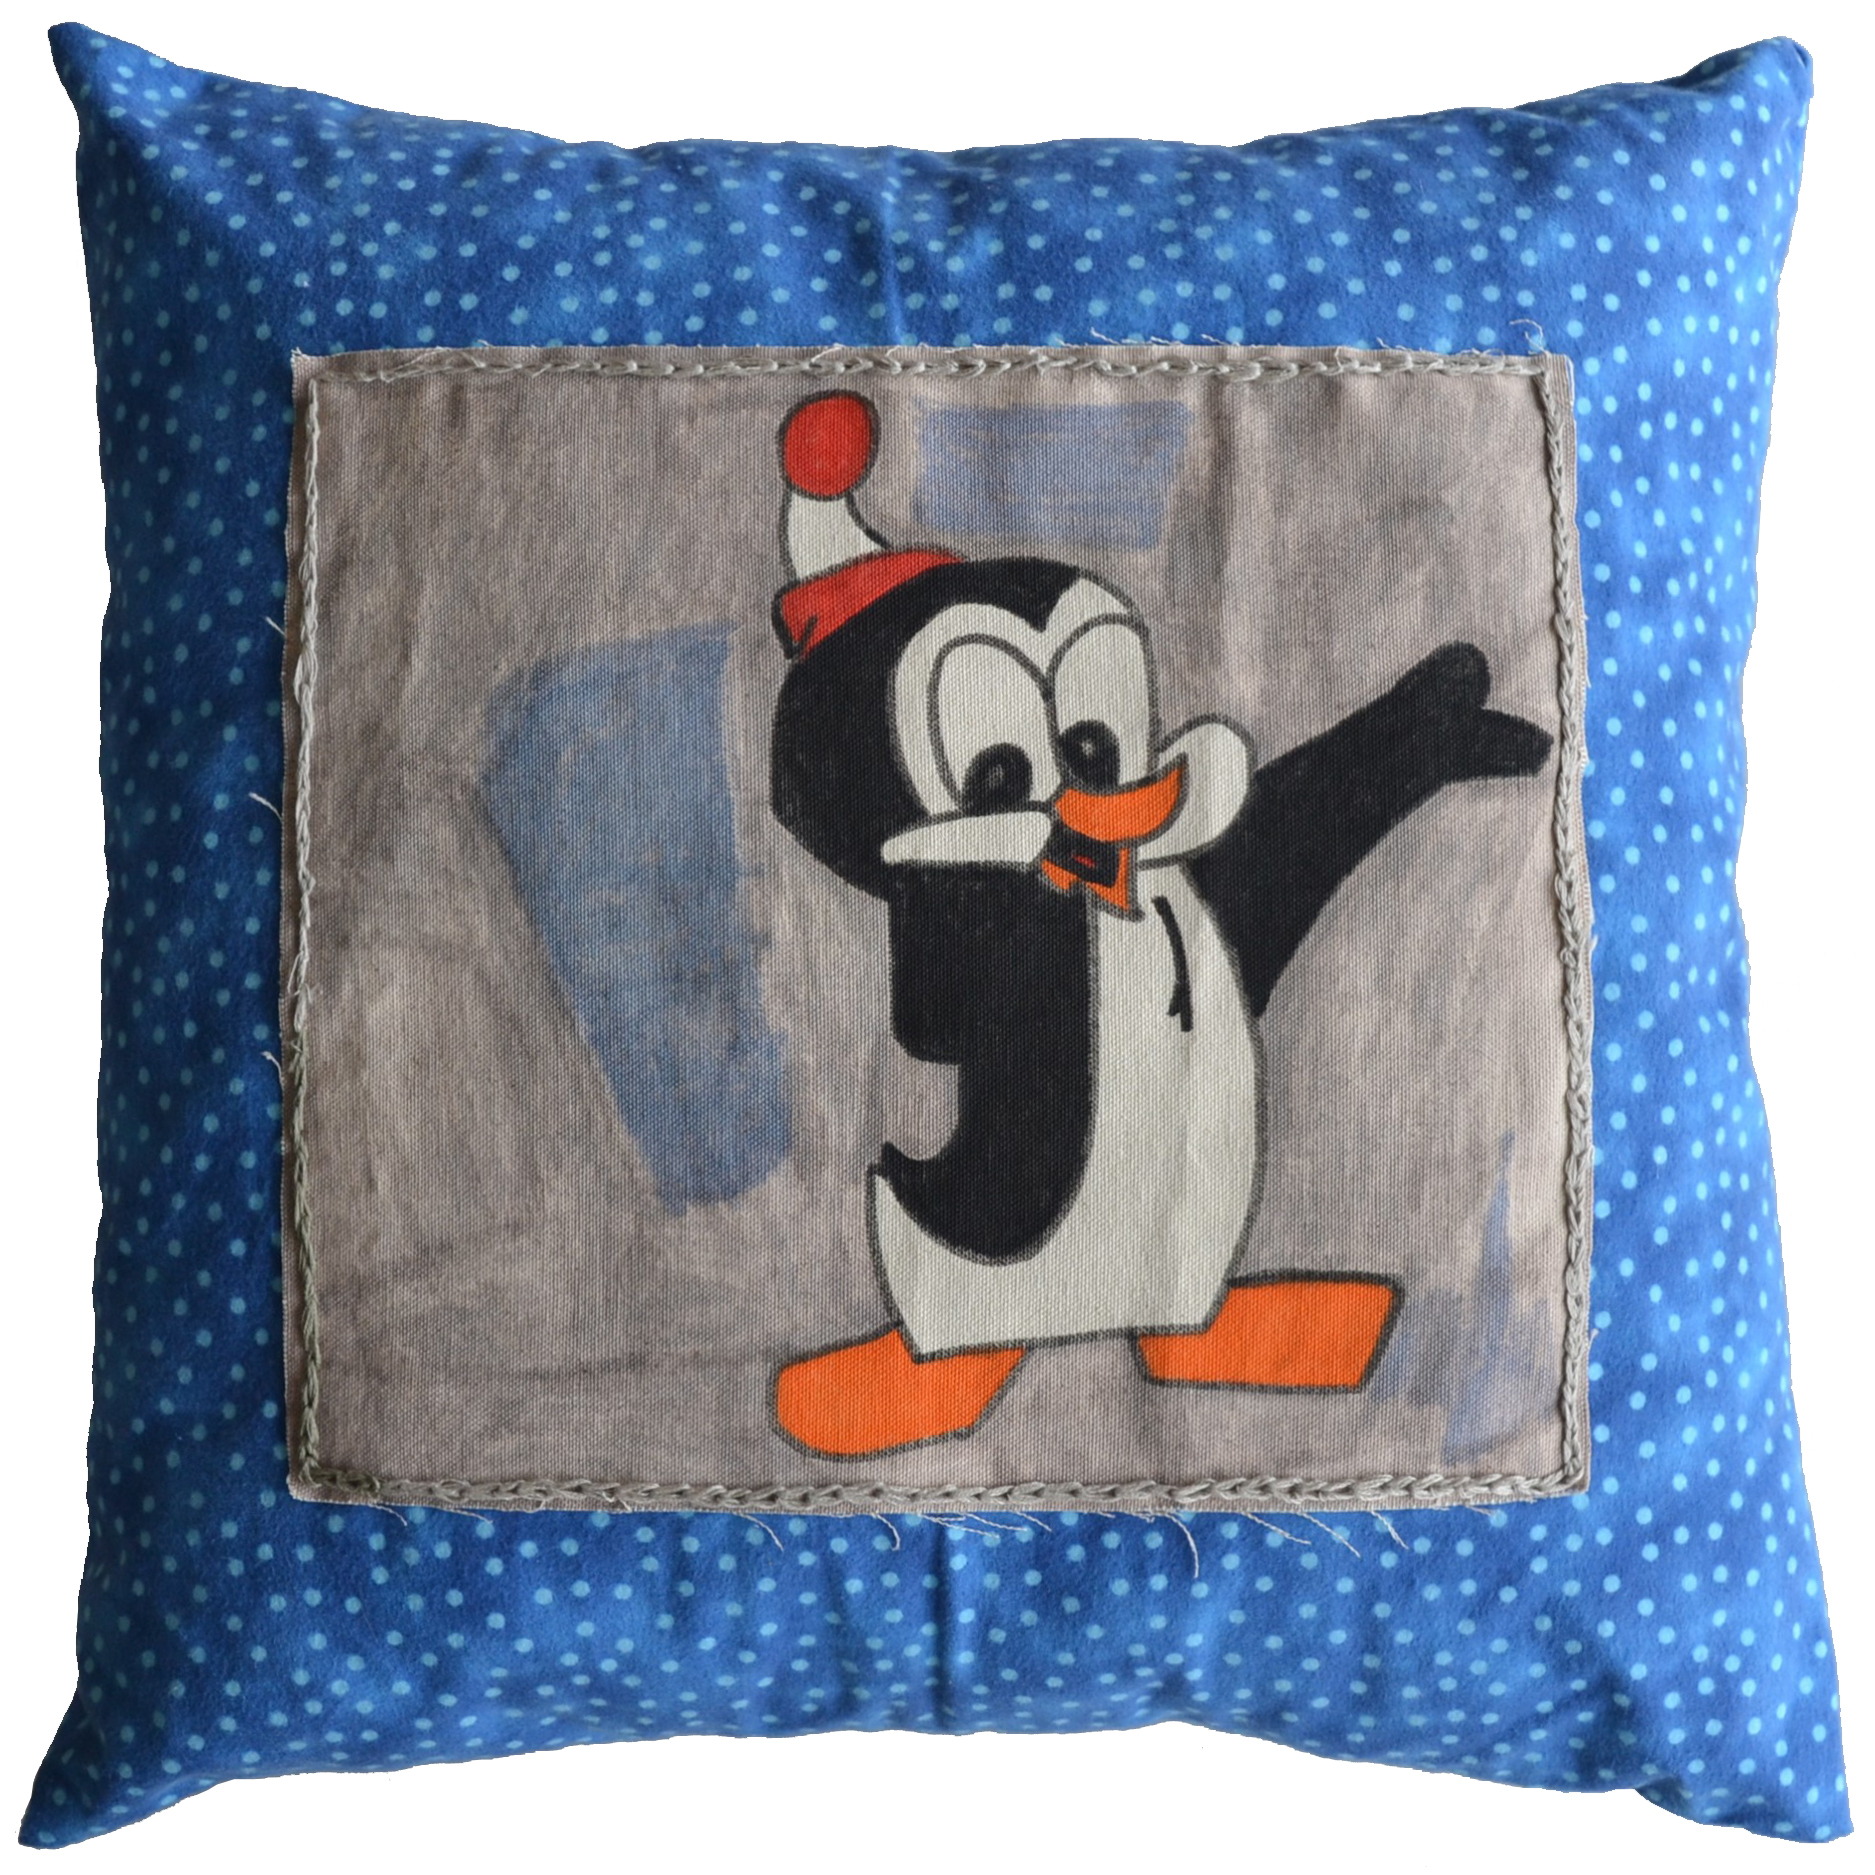 Chilly Willy pillow by Nicanor Sanchez